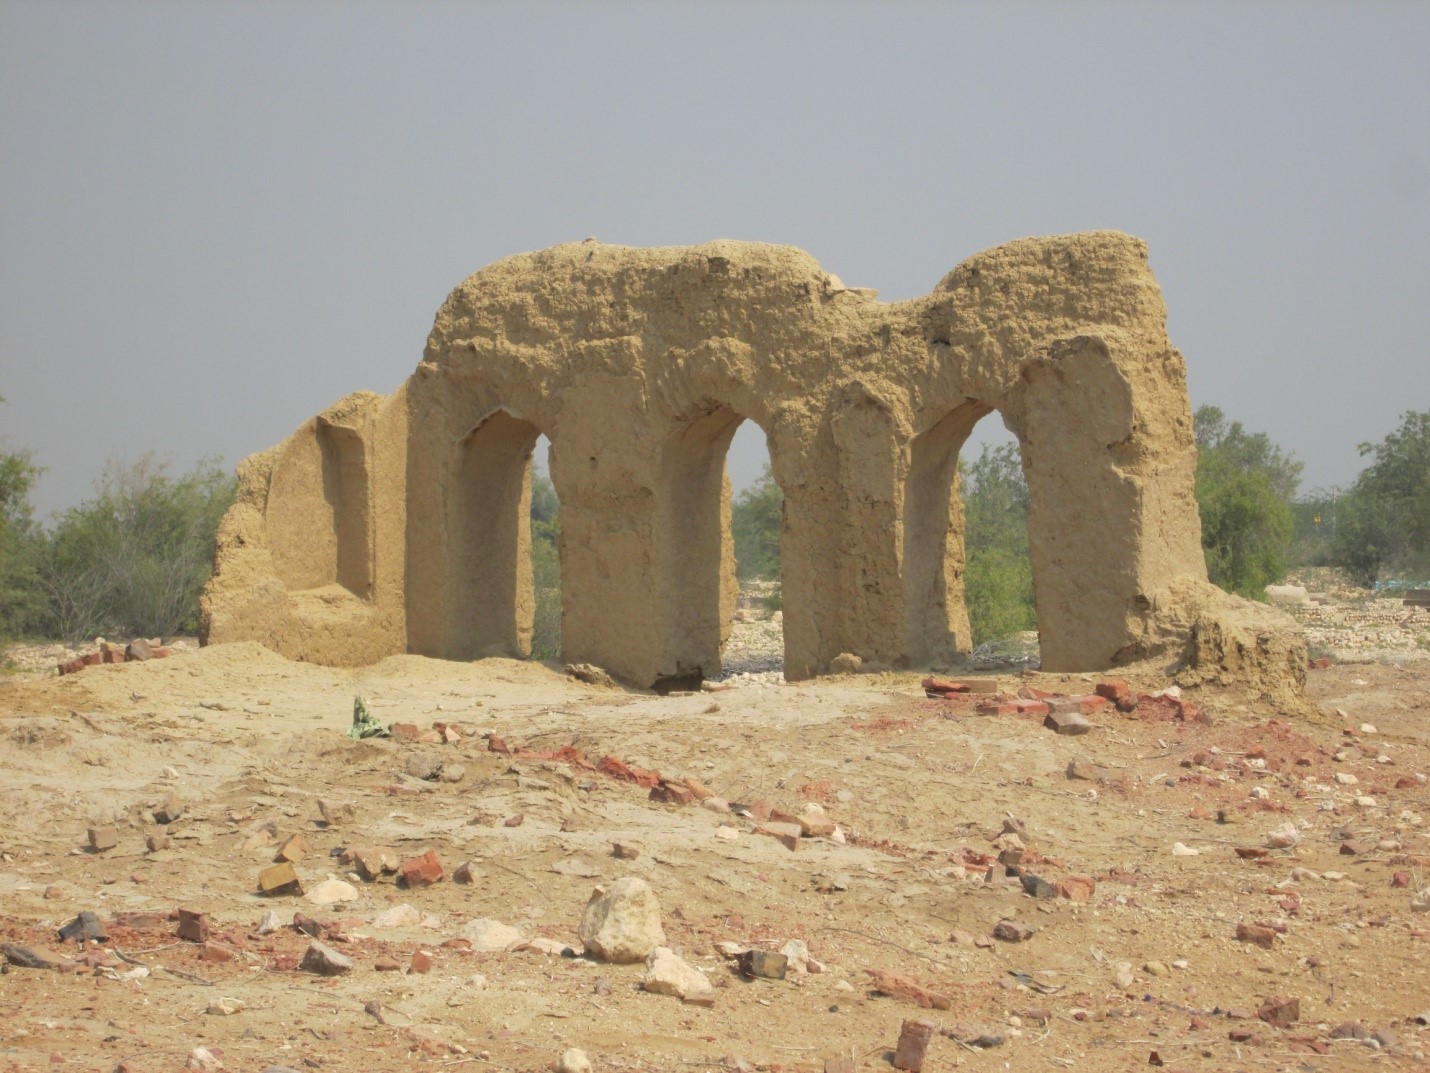 View of Structure with three arches gateways constructed with mud